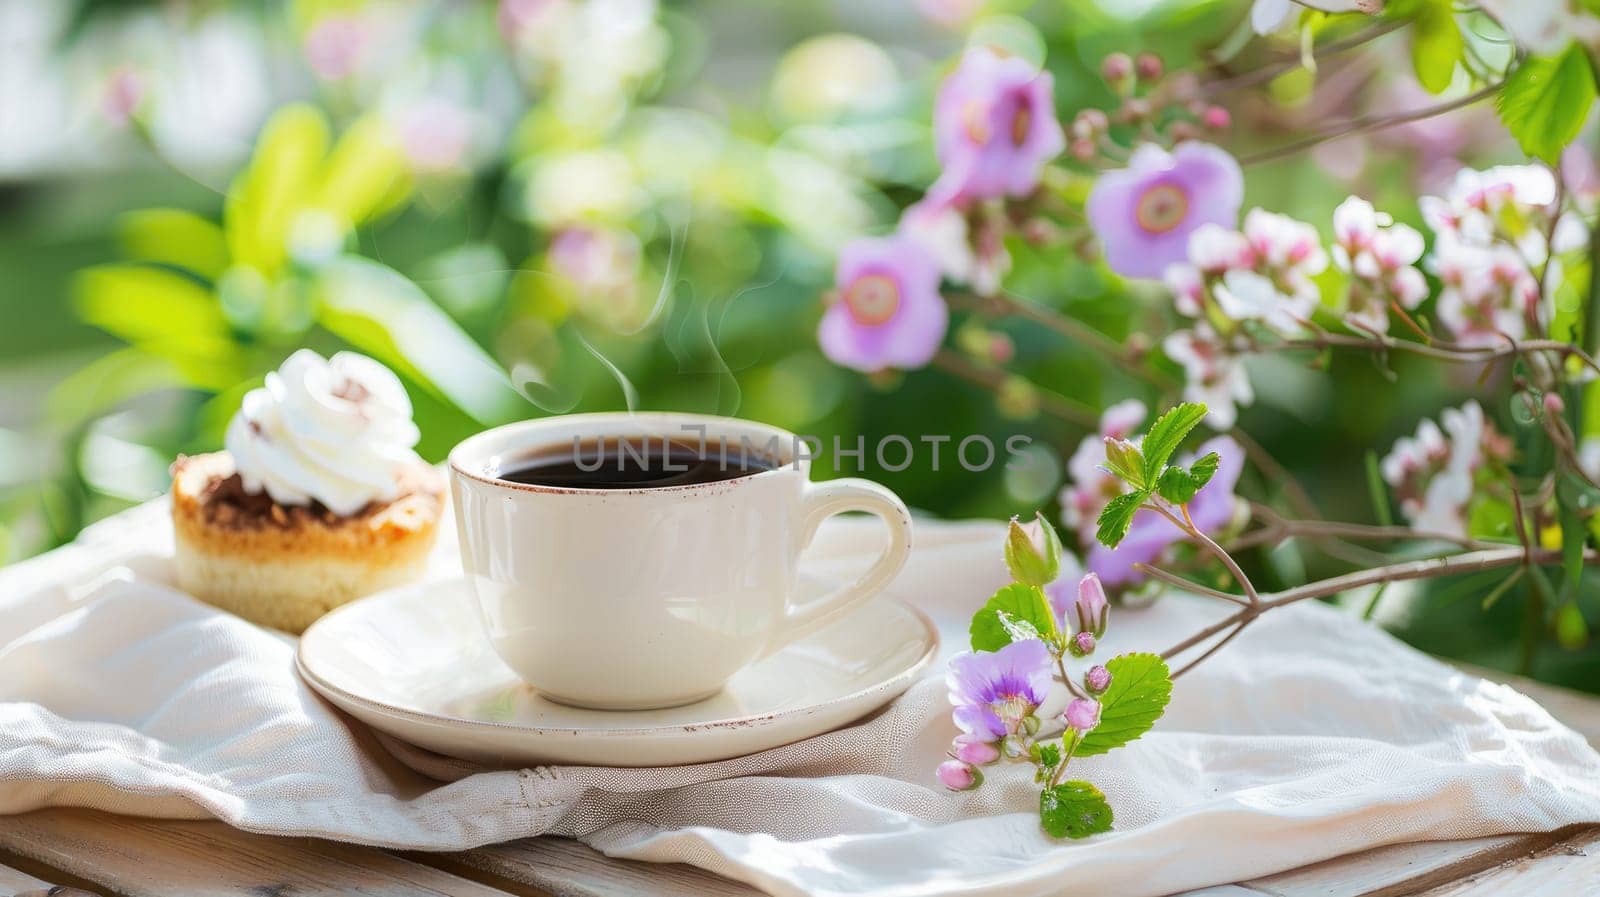 A cup of coffee on a table with a small cake for a snack in a flower garden by nijieimu